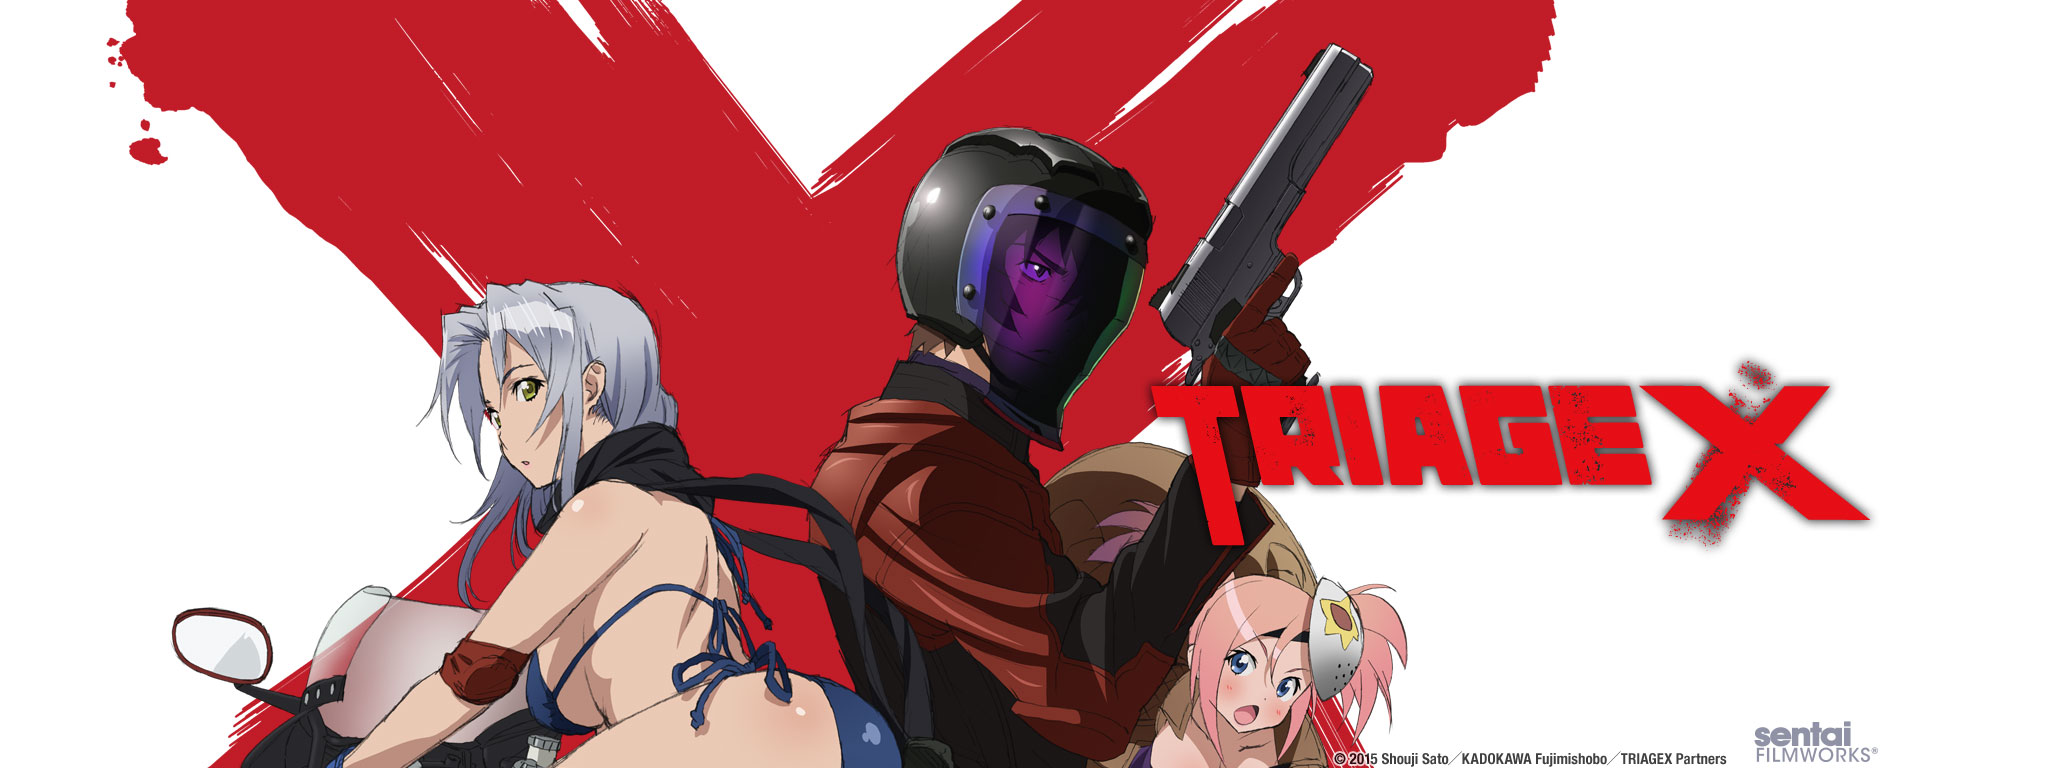 Title Art for Triage X